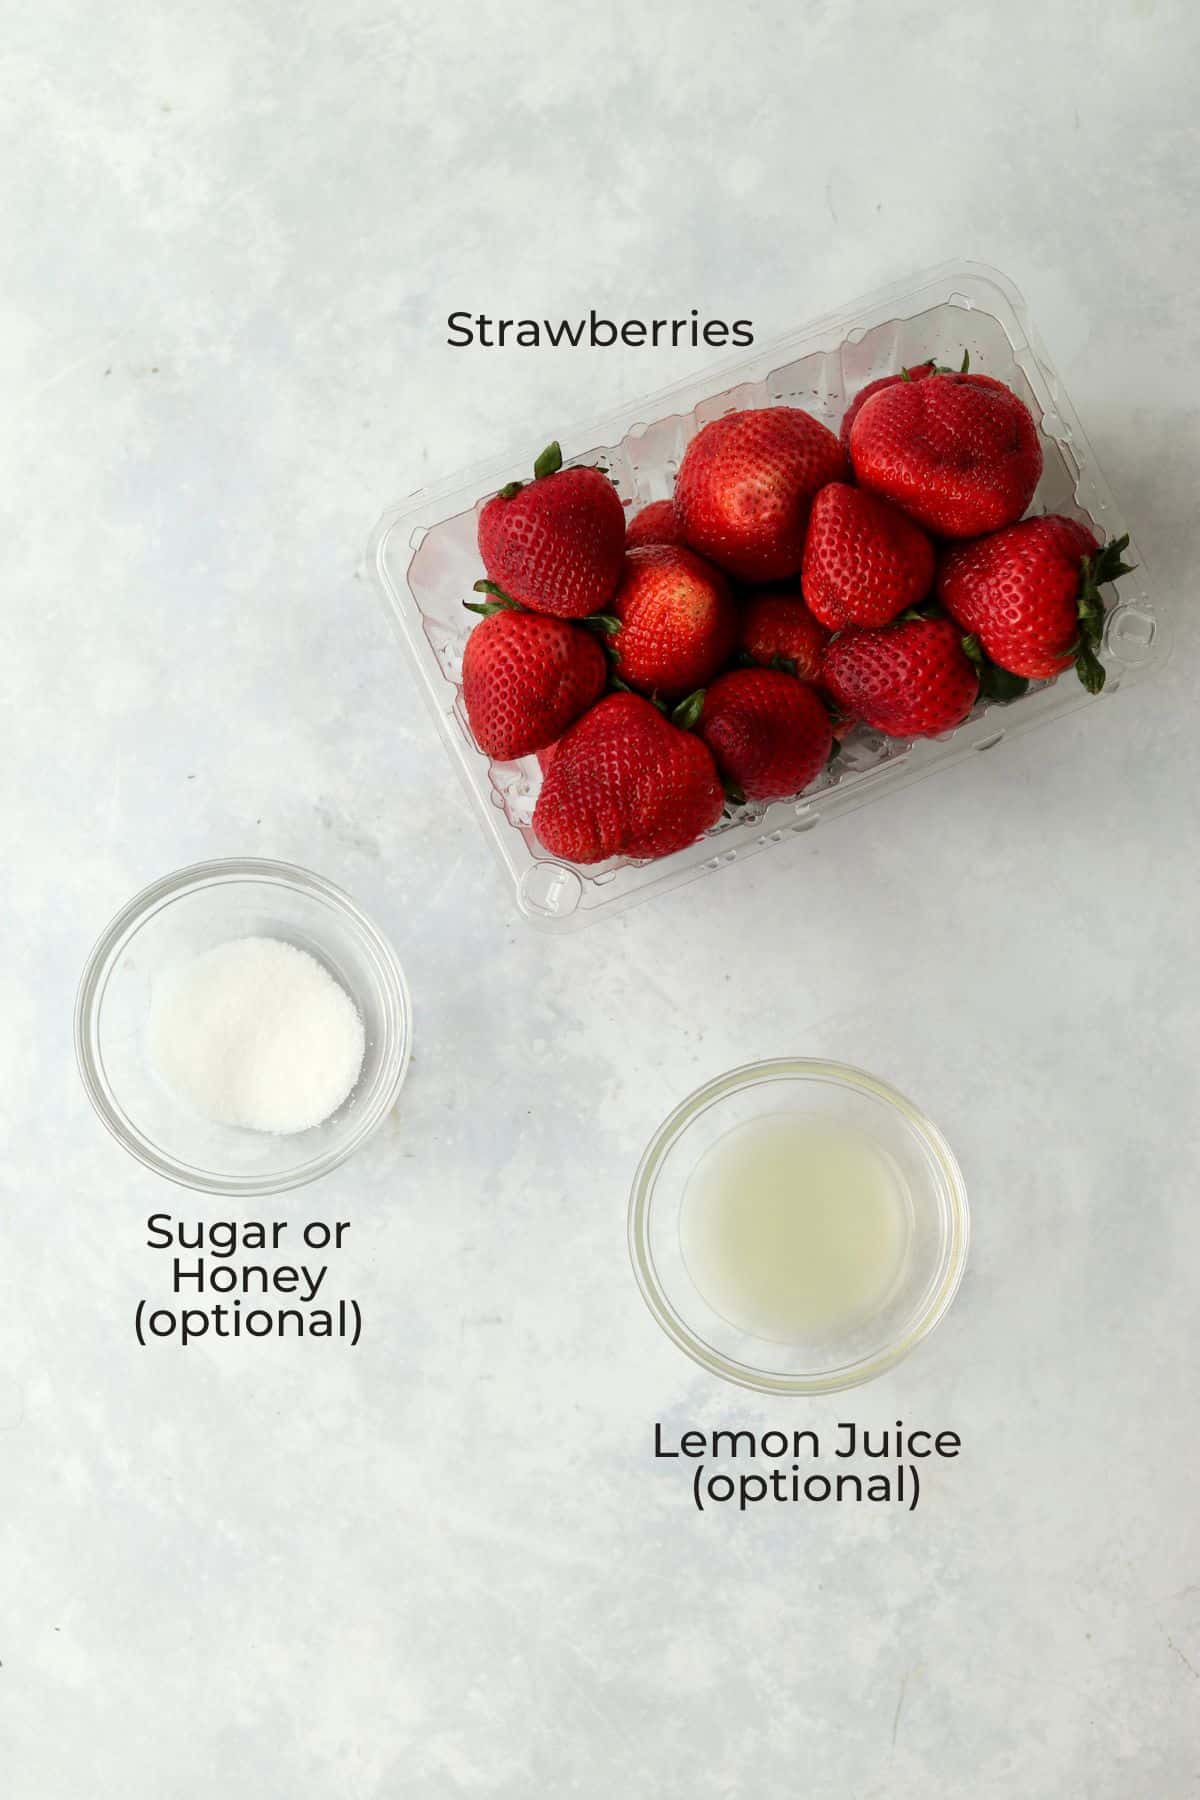 Fresh strawberries in their pint container, sugar in a small bowl, and lemon juice in a small bowl.